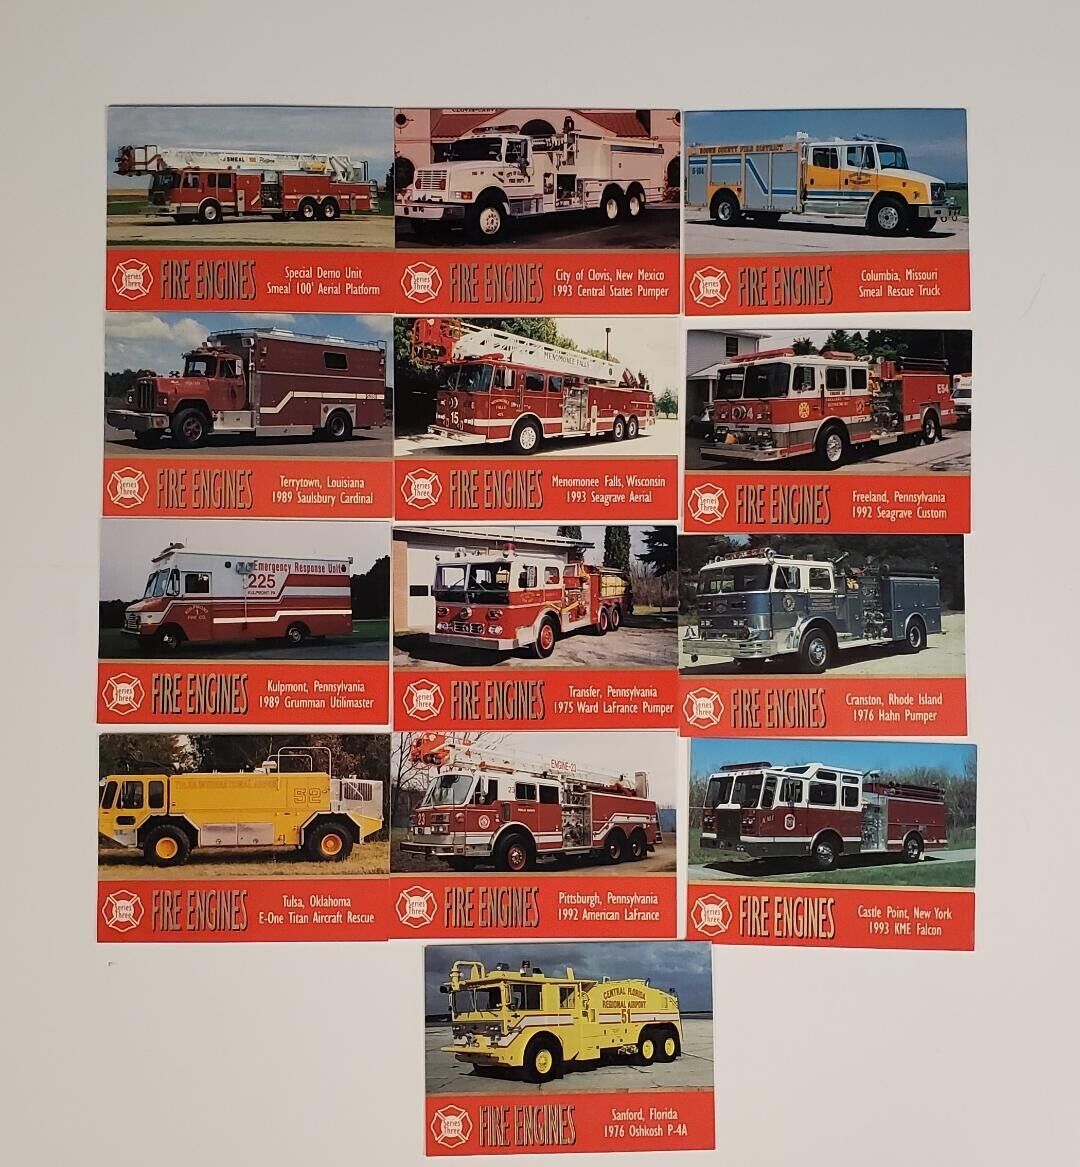 1994 Premium Fire Engines Fire Trucks Series 3 Trading Cards Lot of 13 - Bon Air